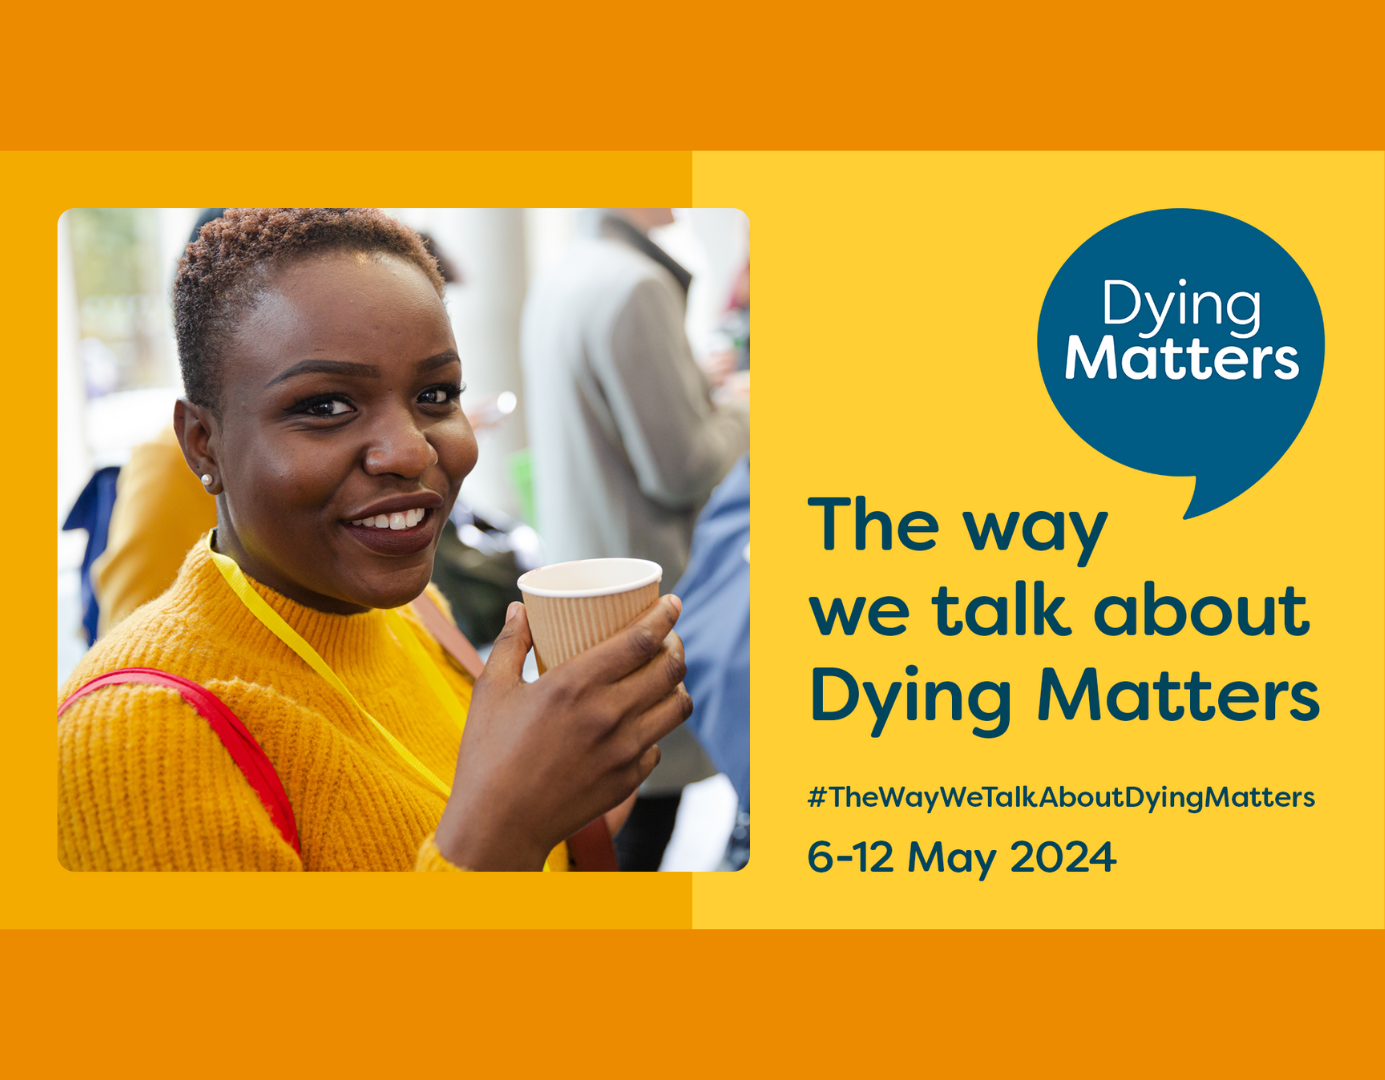 Lady with dark skin in an orange jumper, smiling and holding a drink. Dying Matters symbol of blue speech bubble. Text reading The way we talk about Dying Matters 6-12 May 2024